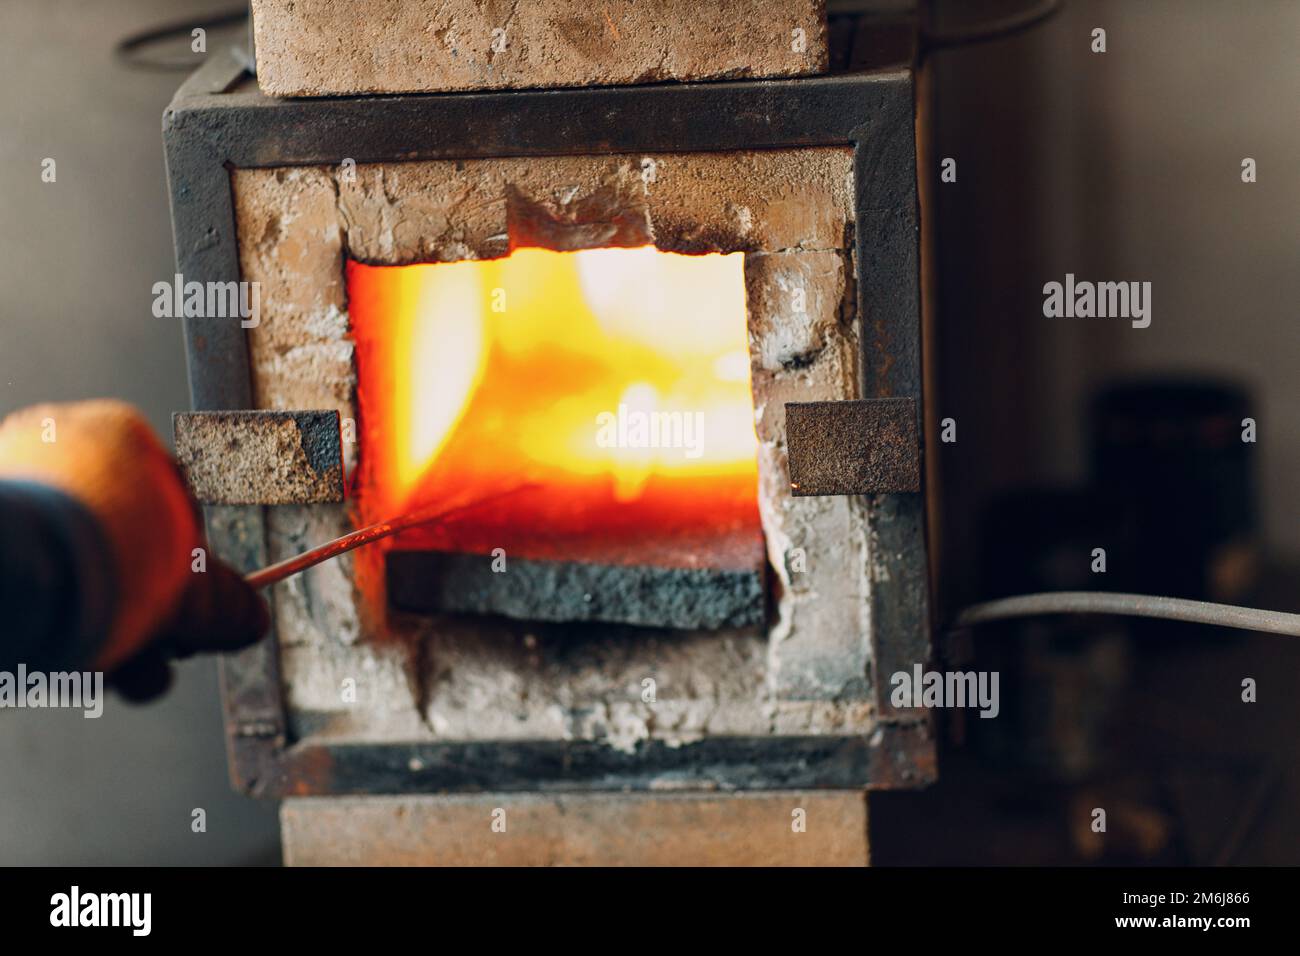 Blacksmith forge oven with hot flame. Smith heating iron piece of steel in fire of red-hot forge Stock Photo